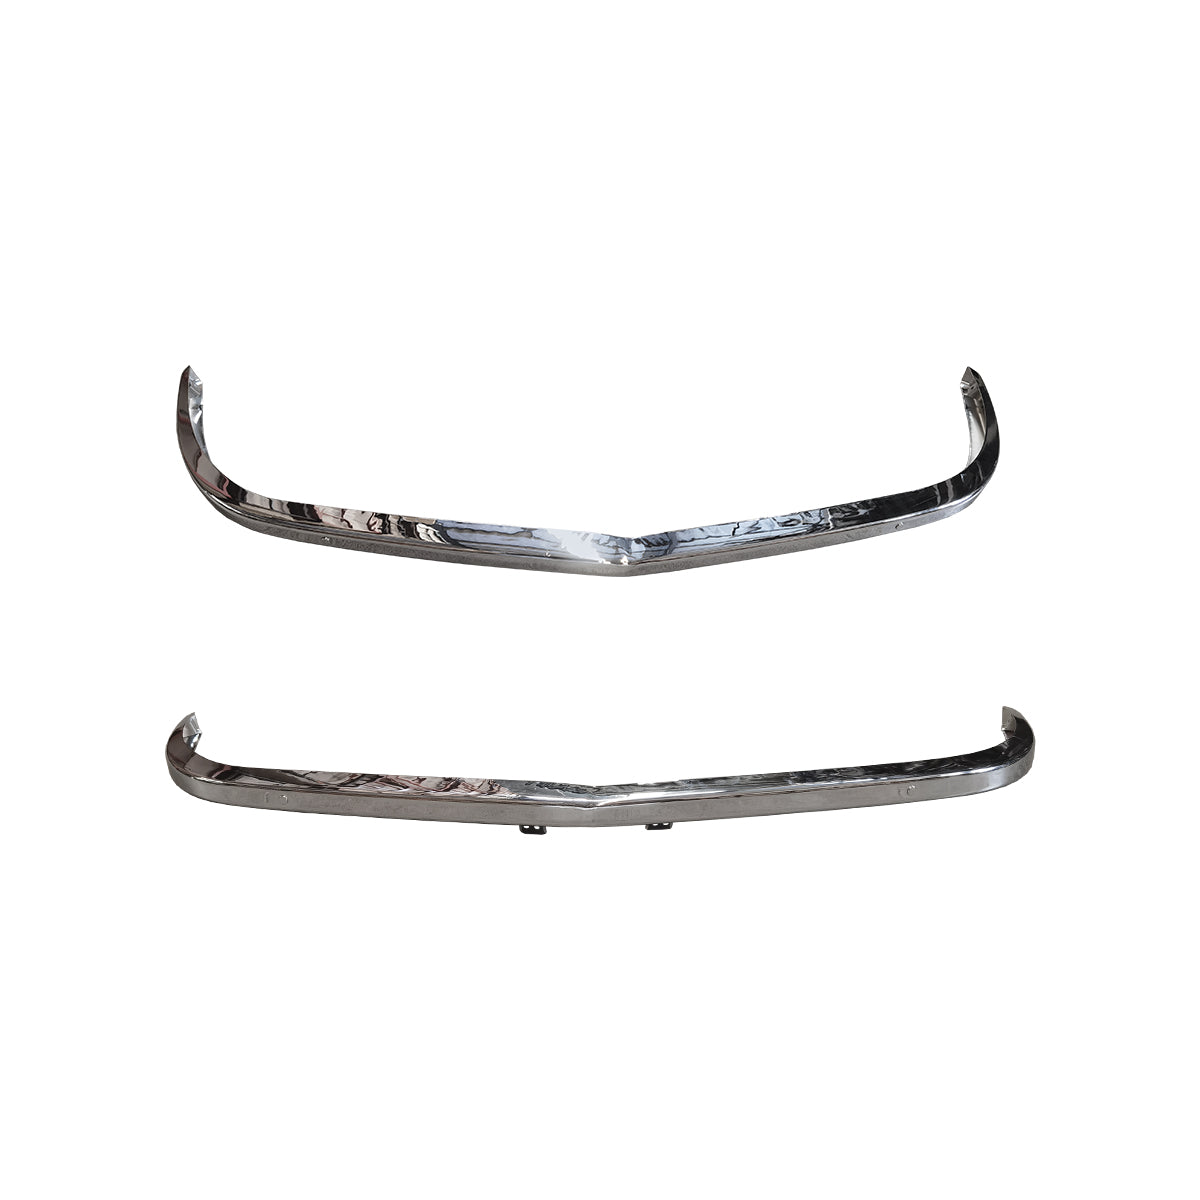 Replacement FRONT BUMPER WITHOUT HOLES, 1969-1973 Nissan Datsun 240Z, (STEEL)